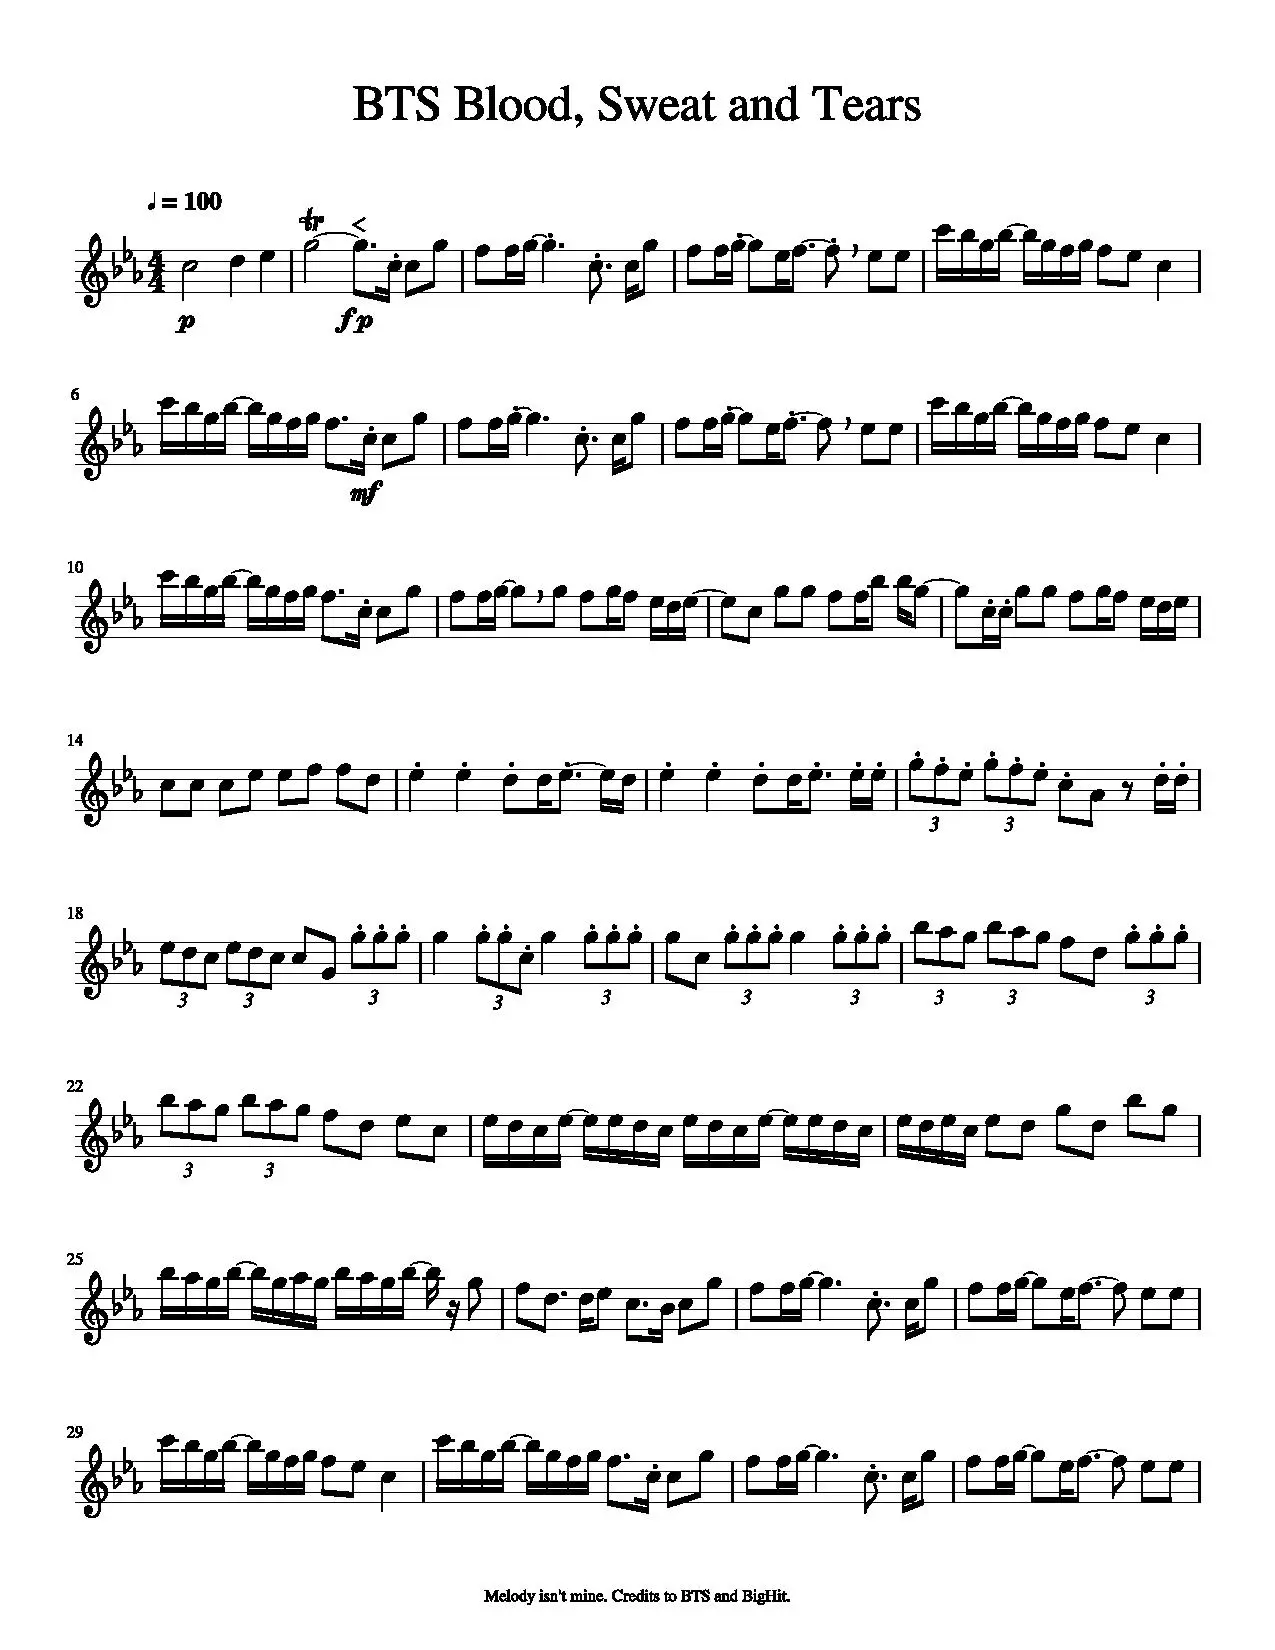 blood sweat and tears partitura violin - What is the tempo of blood sweat and tears